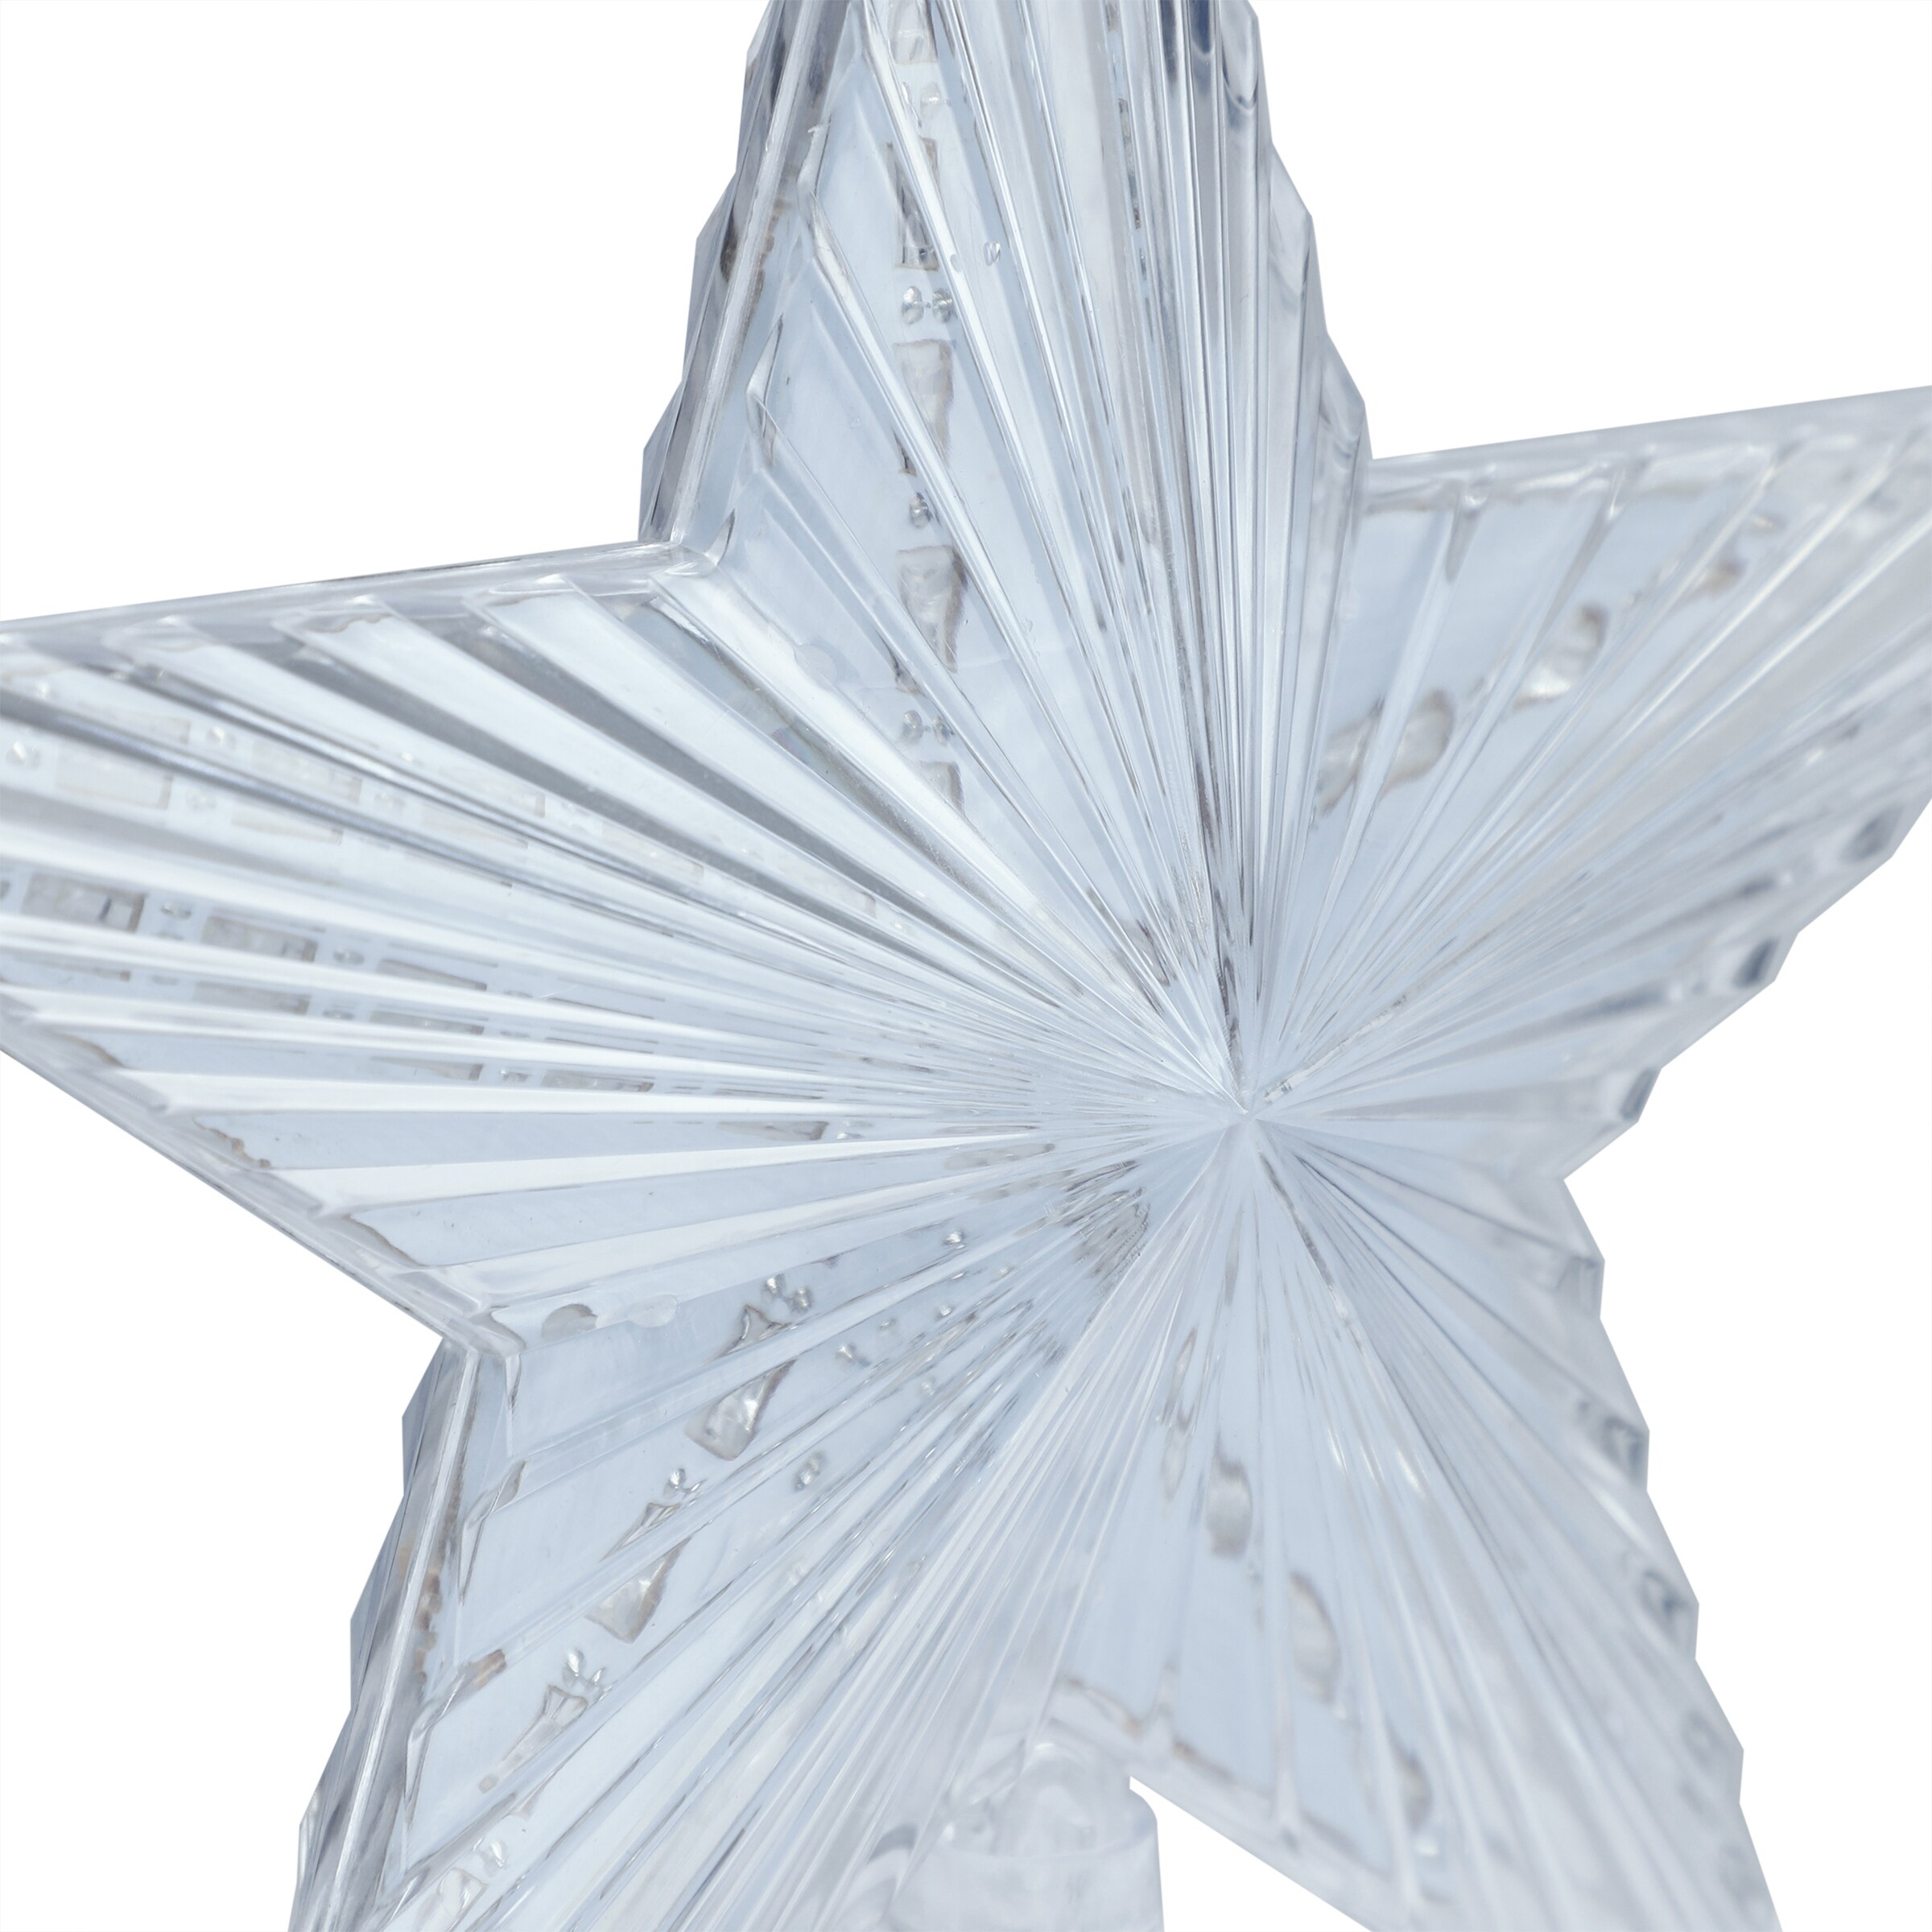 https://ak1.ostkcdn.com/images/products/is/images/direct/ddf3716938f56853d9af20d4b13560e2a56217ae/Alpine-Corporation-Flashing-Star-Tree-Topper-with-LED-Lights.jpg